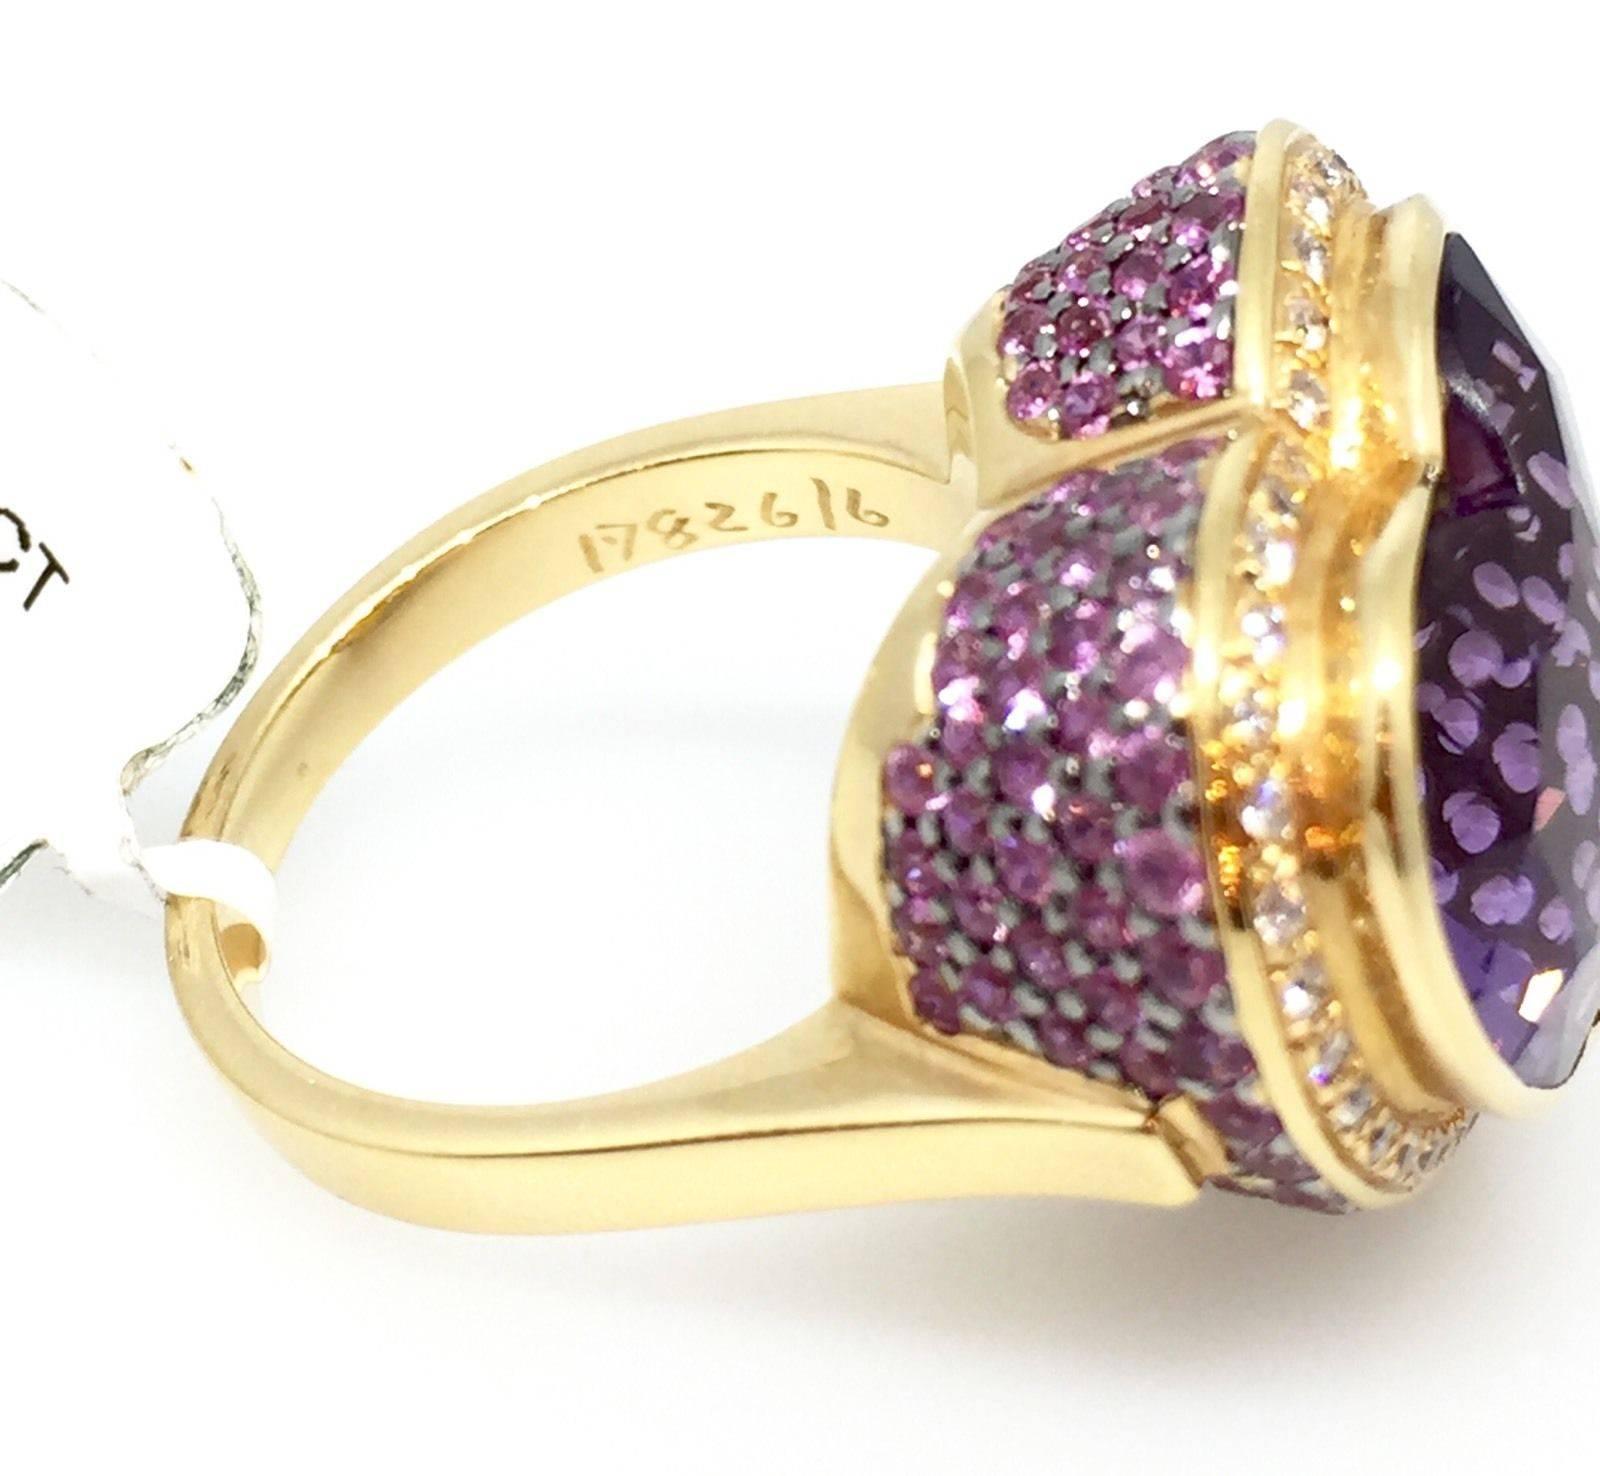 Zorab Heart Amethyst and Multi-Gem Ring in 18 Karat Yellow Gold In Excellent Condition For Sale In La Jolla, CA